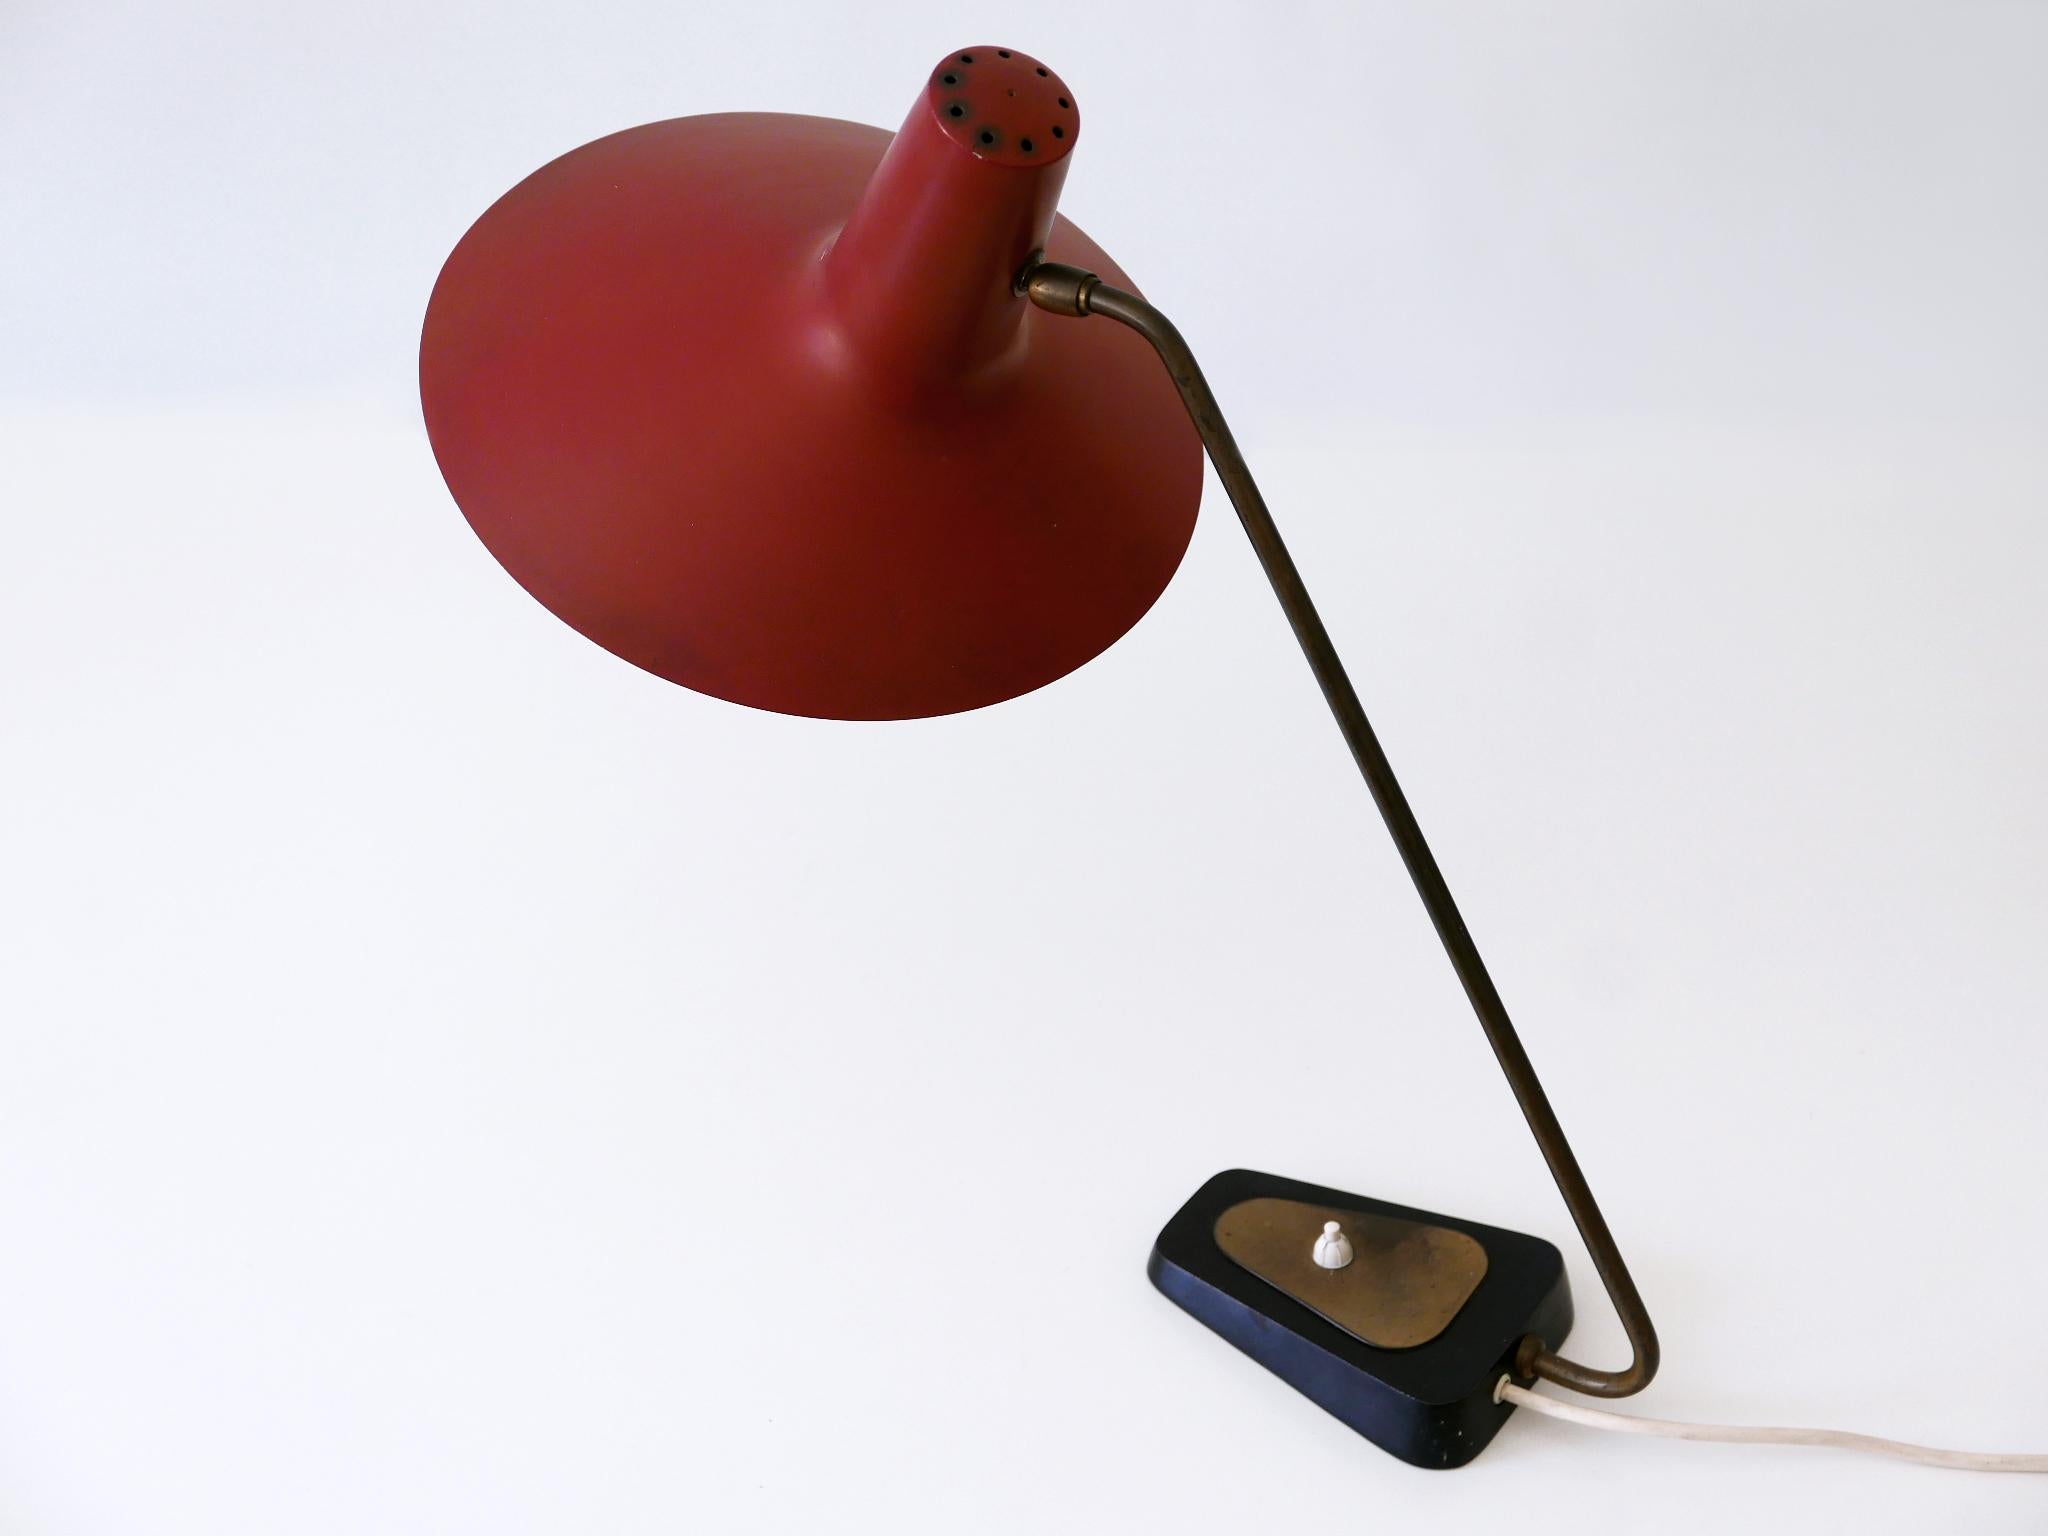 Exceptional Mid-Century Modern Table Lamp by Gebrüder Cosack Germany 1950s For Sale 10